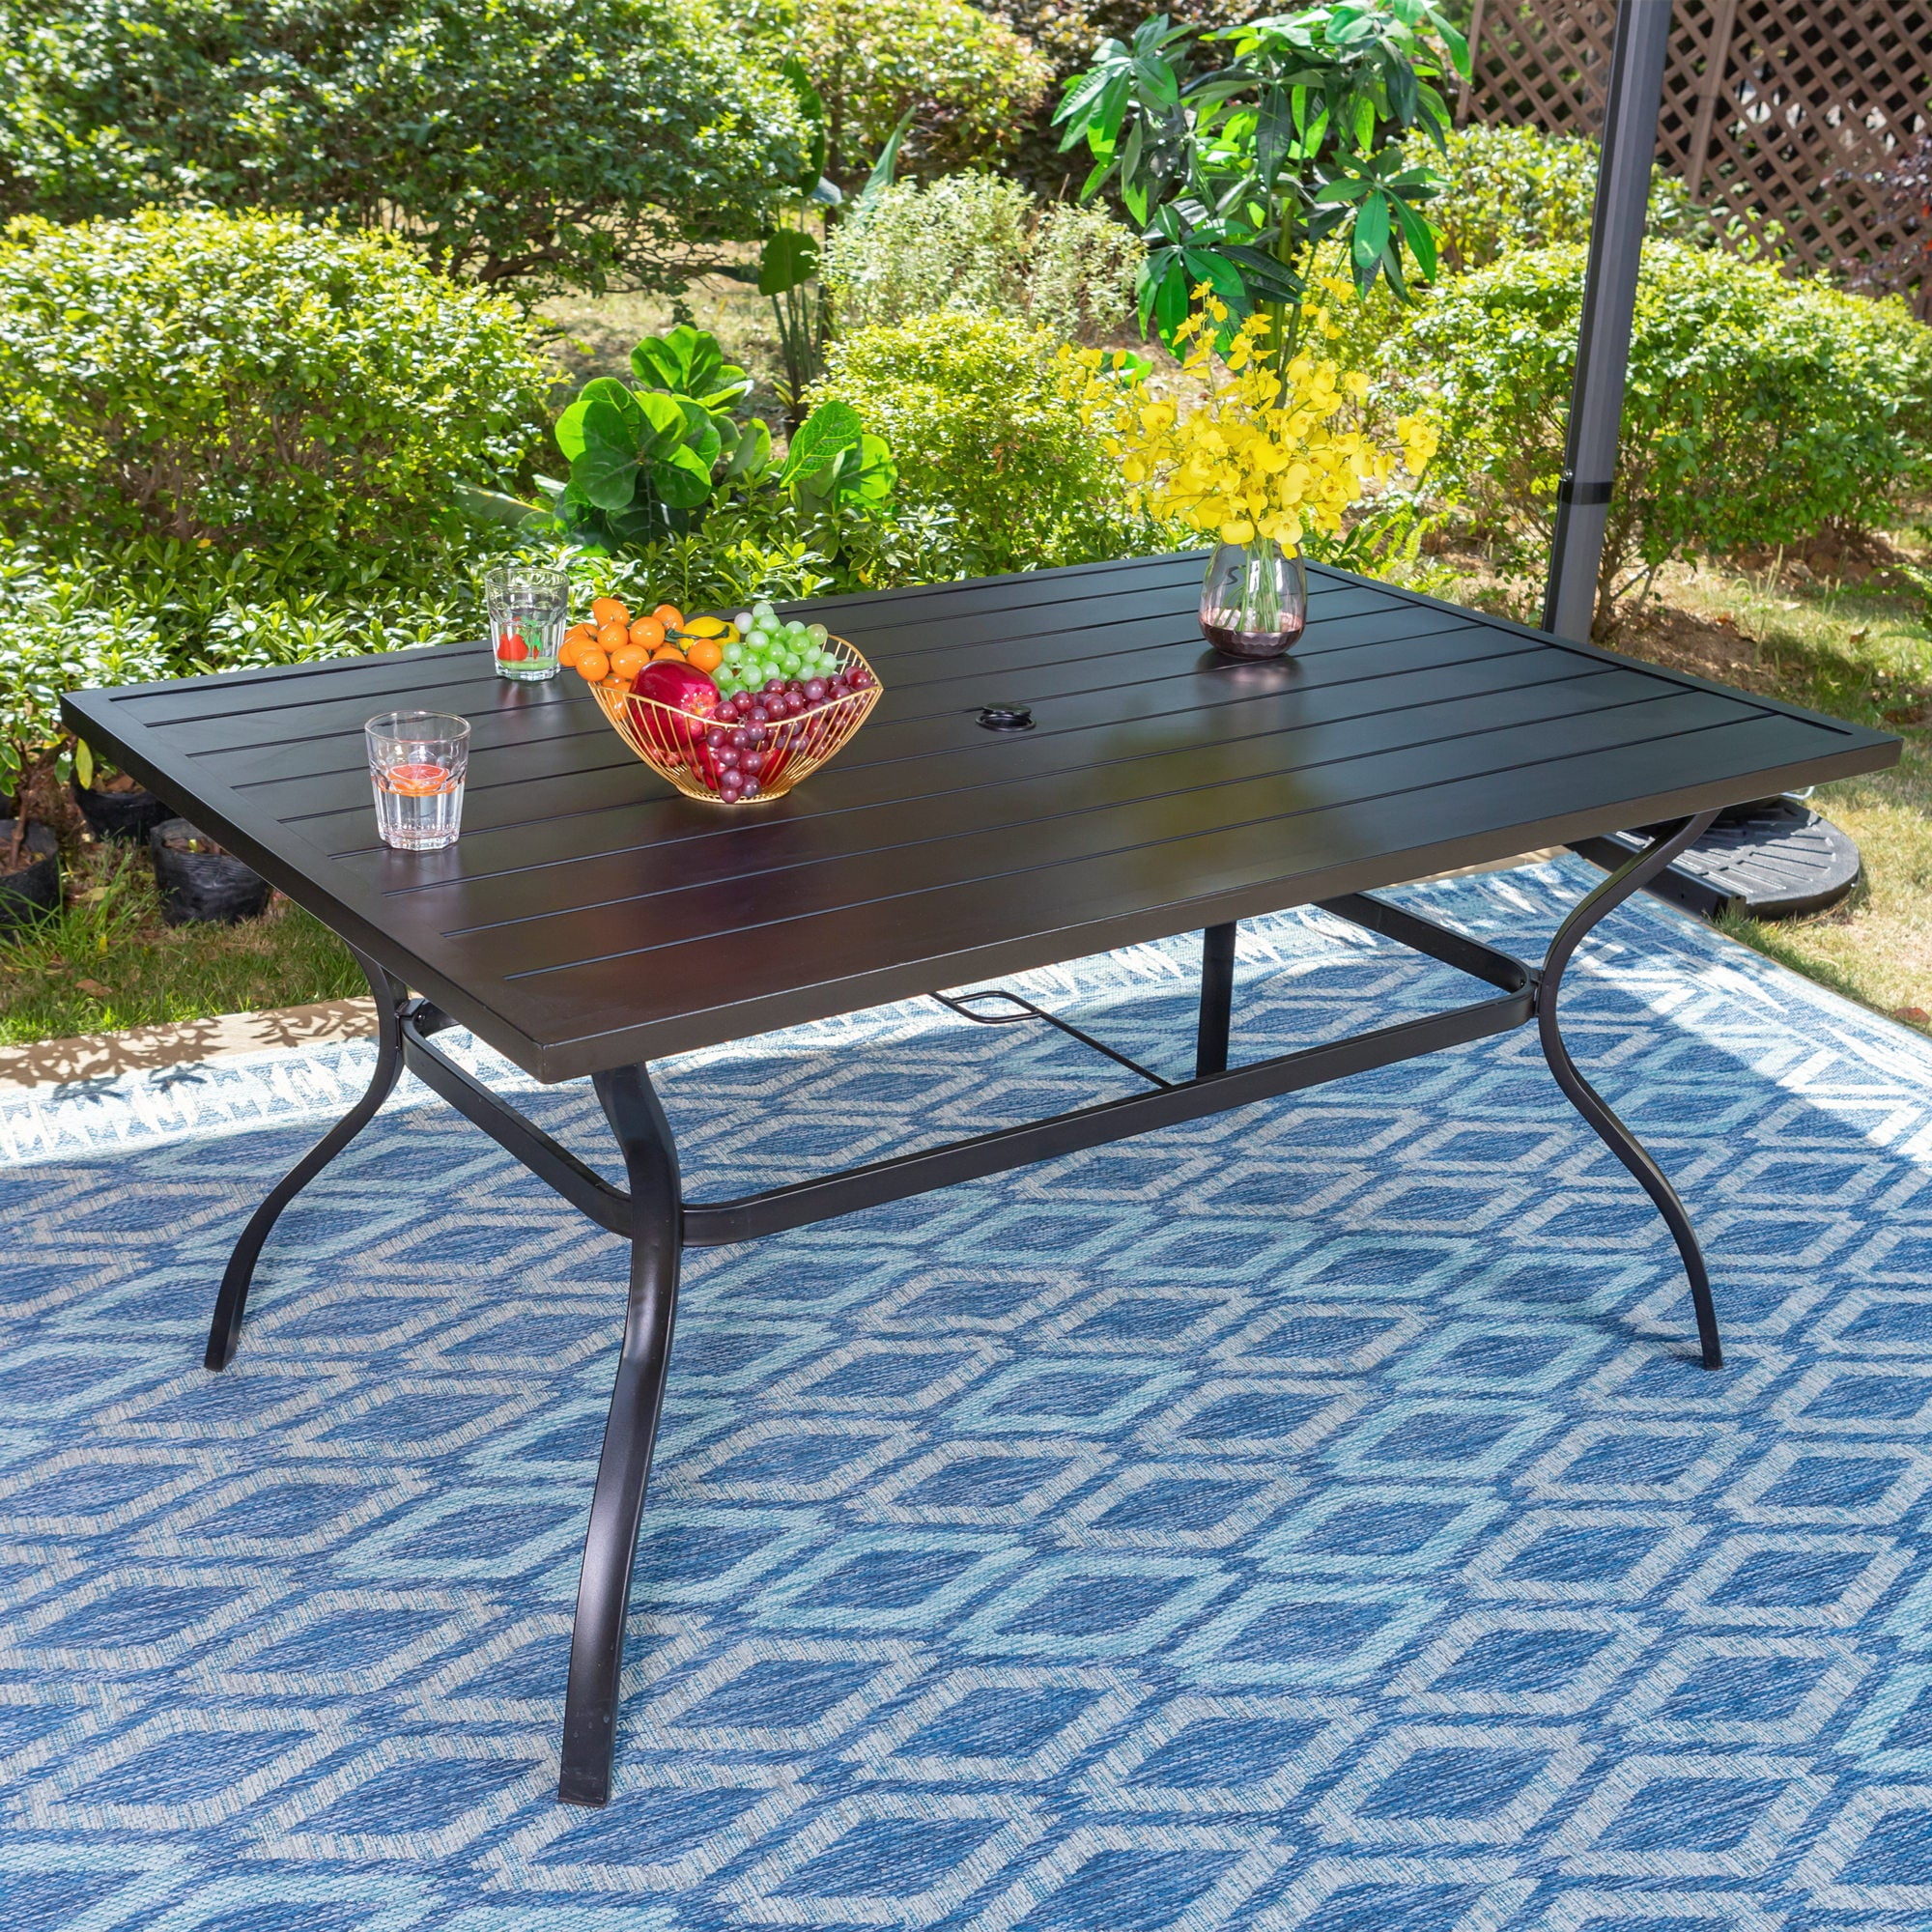 Sophia & William Outdoor End Table Black Small Metal Side Tables Square Patio Coffee Bistro Table 